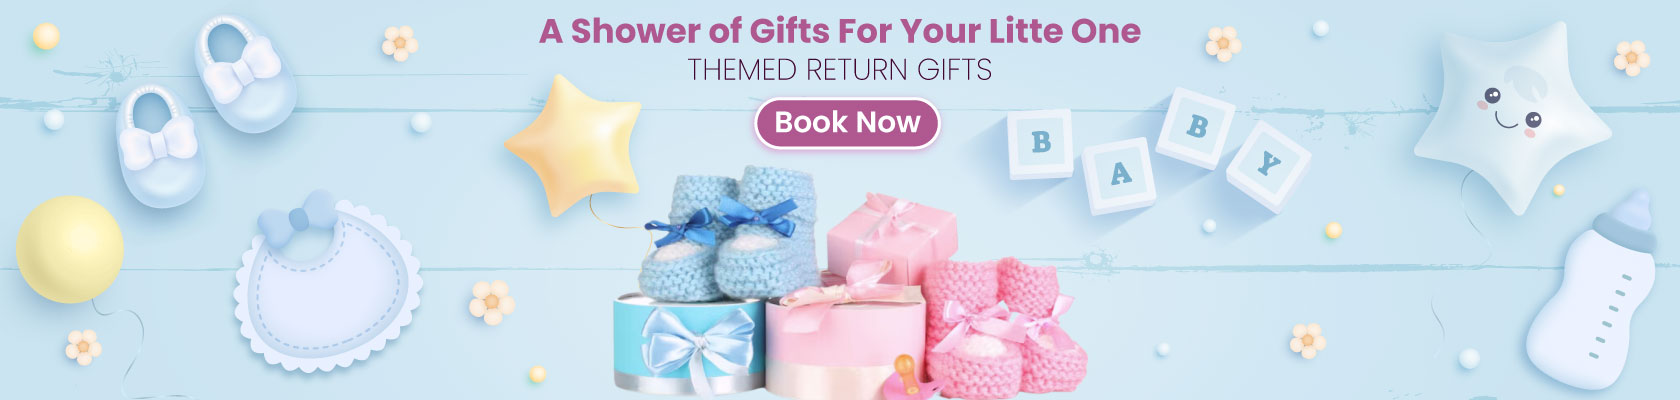 Baby shower return gift ideas for guests